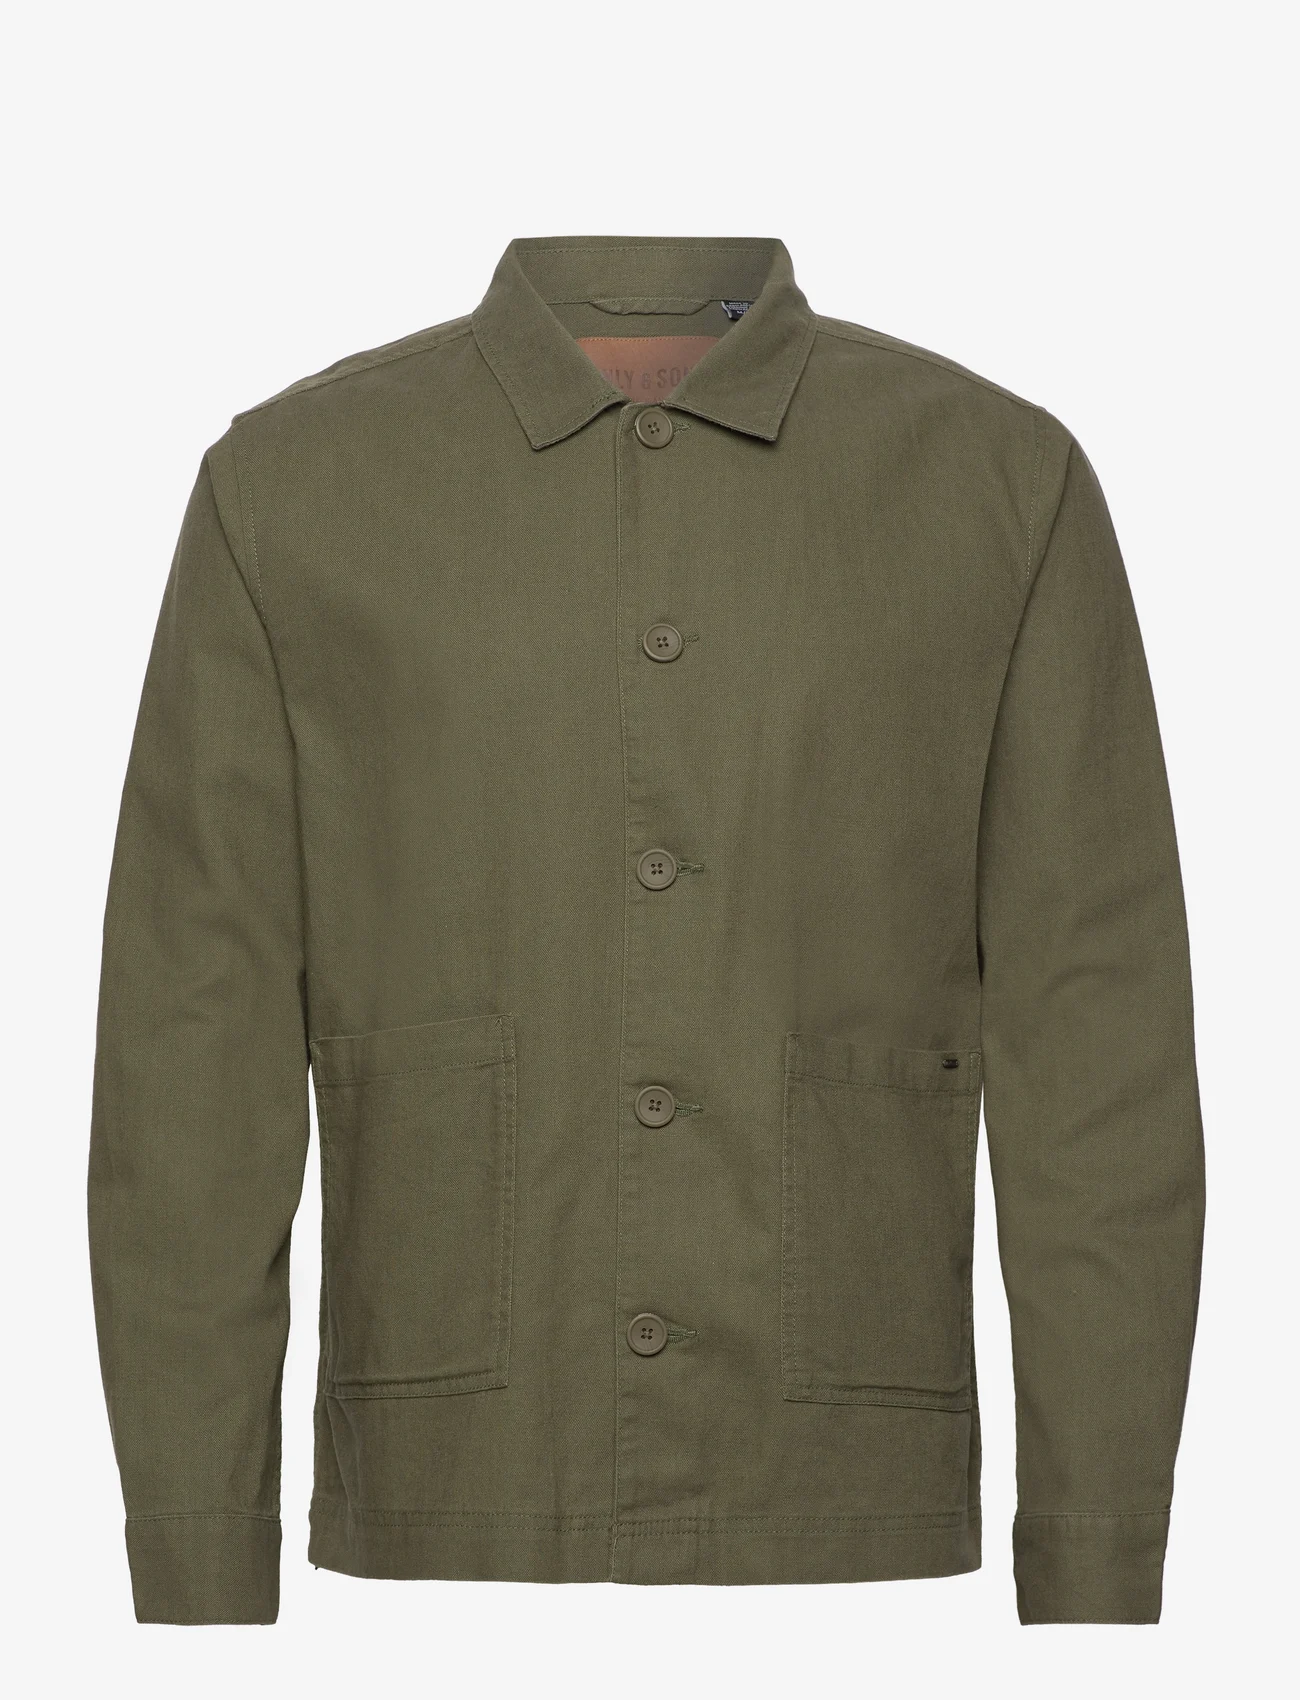 ONLY & SONS - ONSKIER 0019 COT LIN OVERSHIRT - olive night - 0